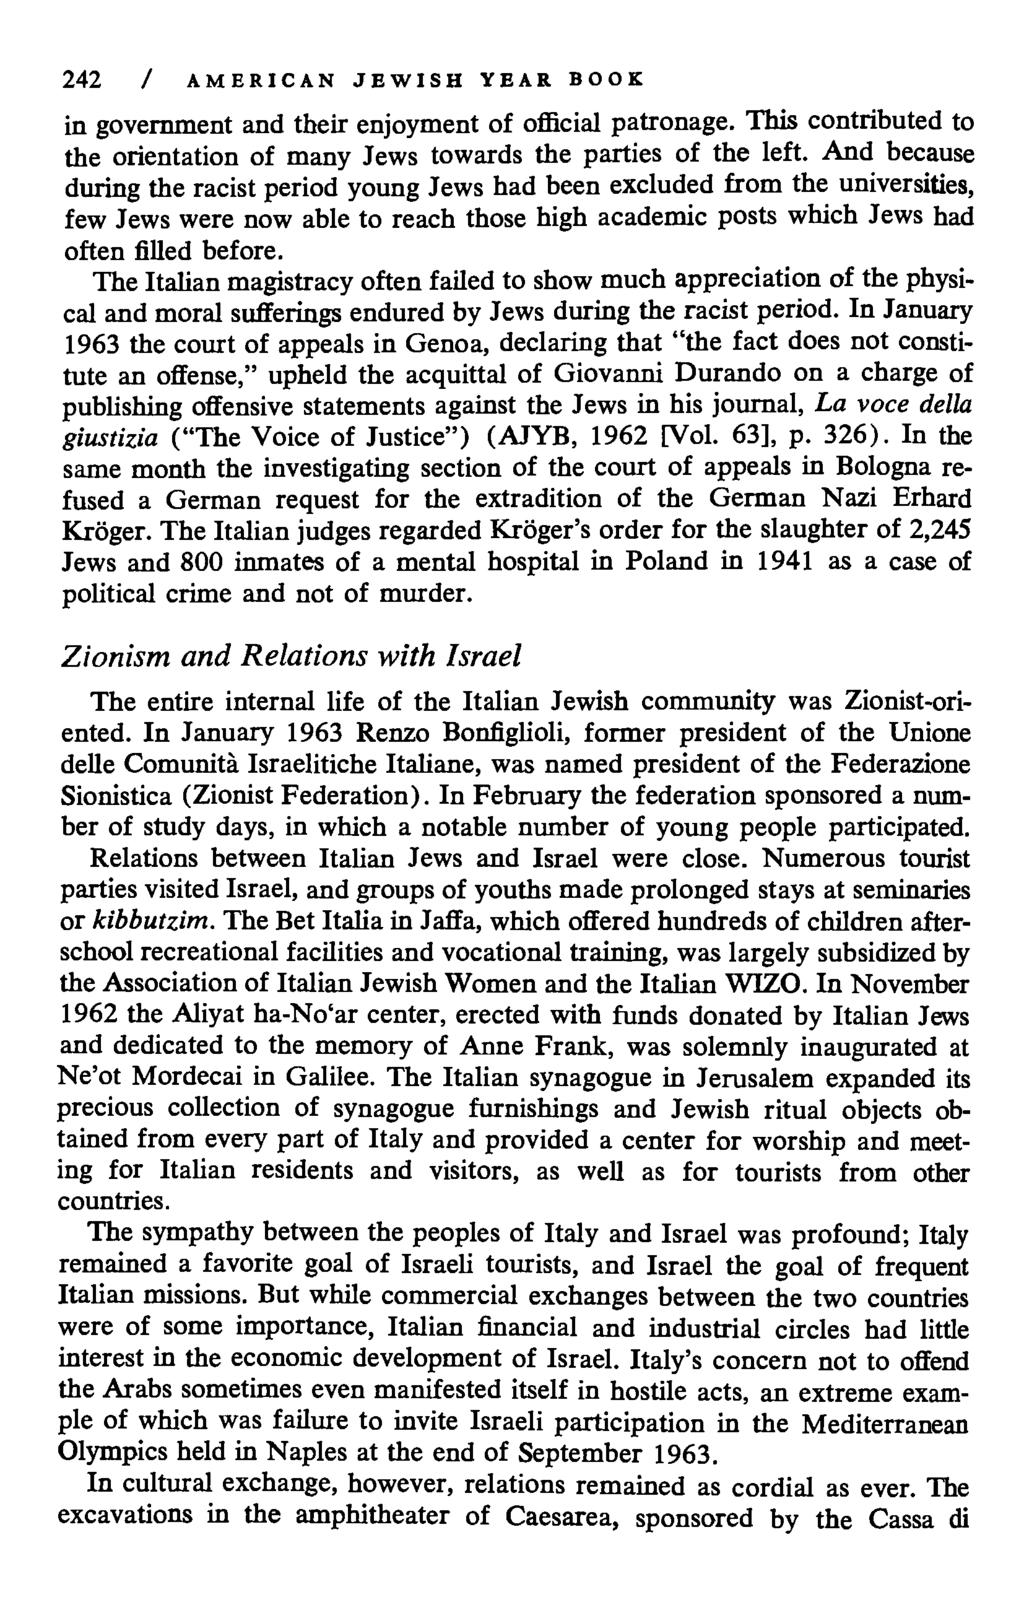 242 / AMERICAN JEWISH YEAR BOOK in government and their enjoyment of official patronage. This contributed to the orientation of many Jews towards the parties of the left.